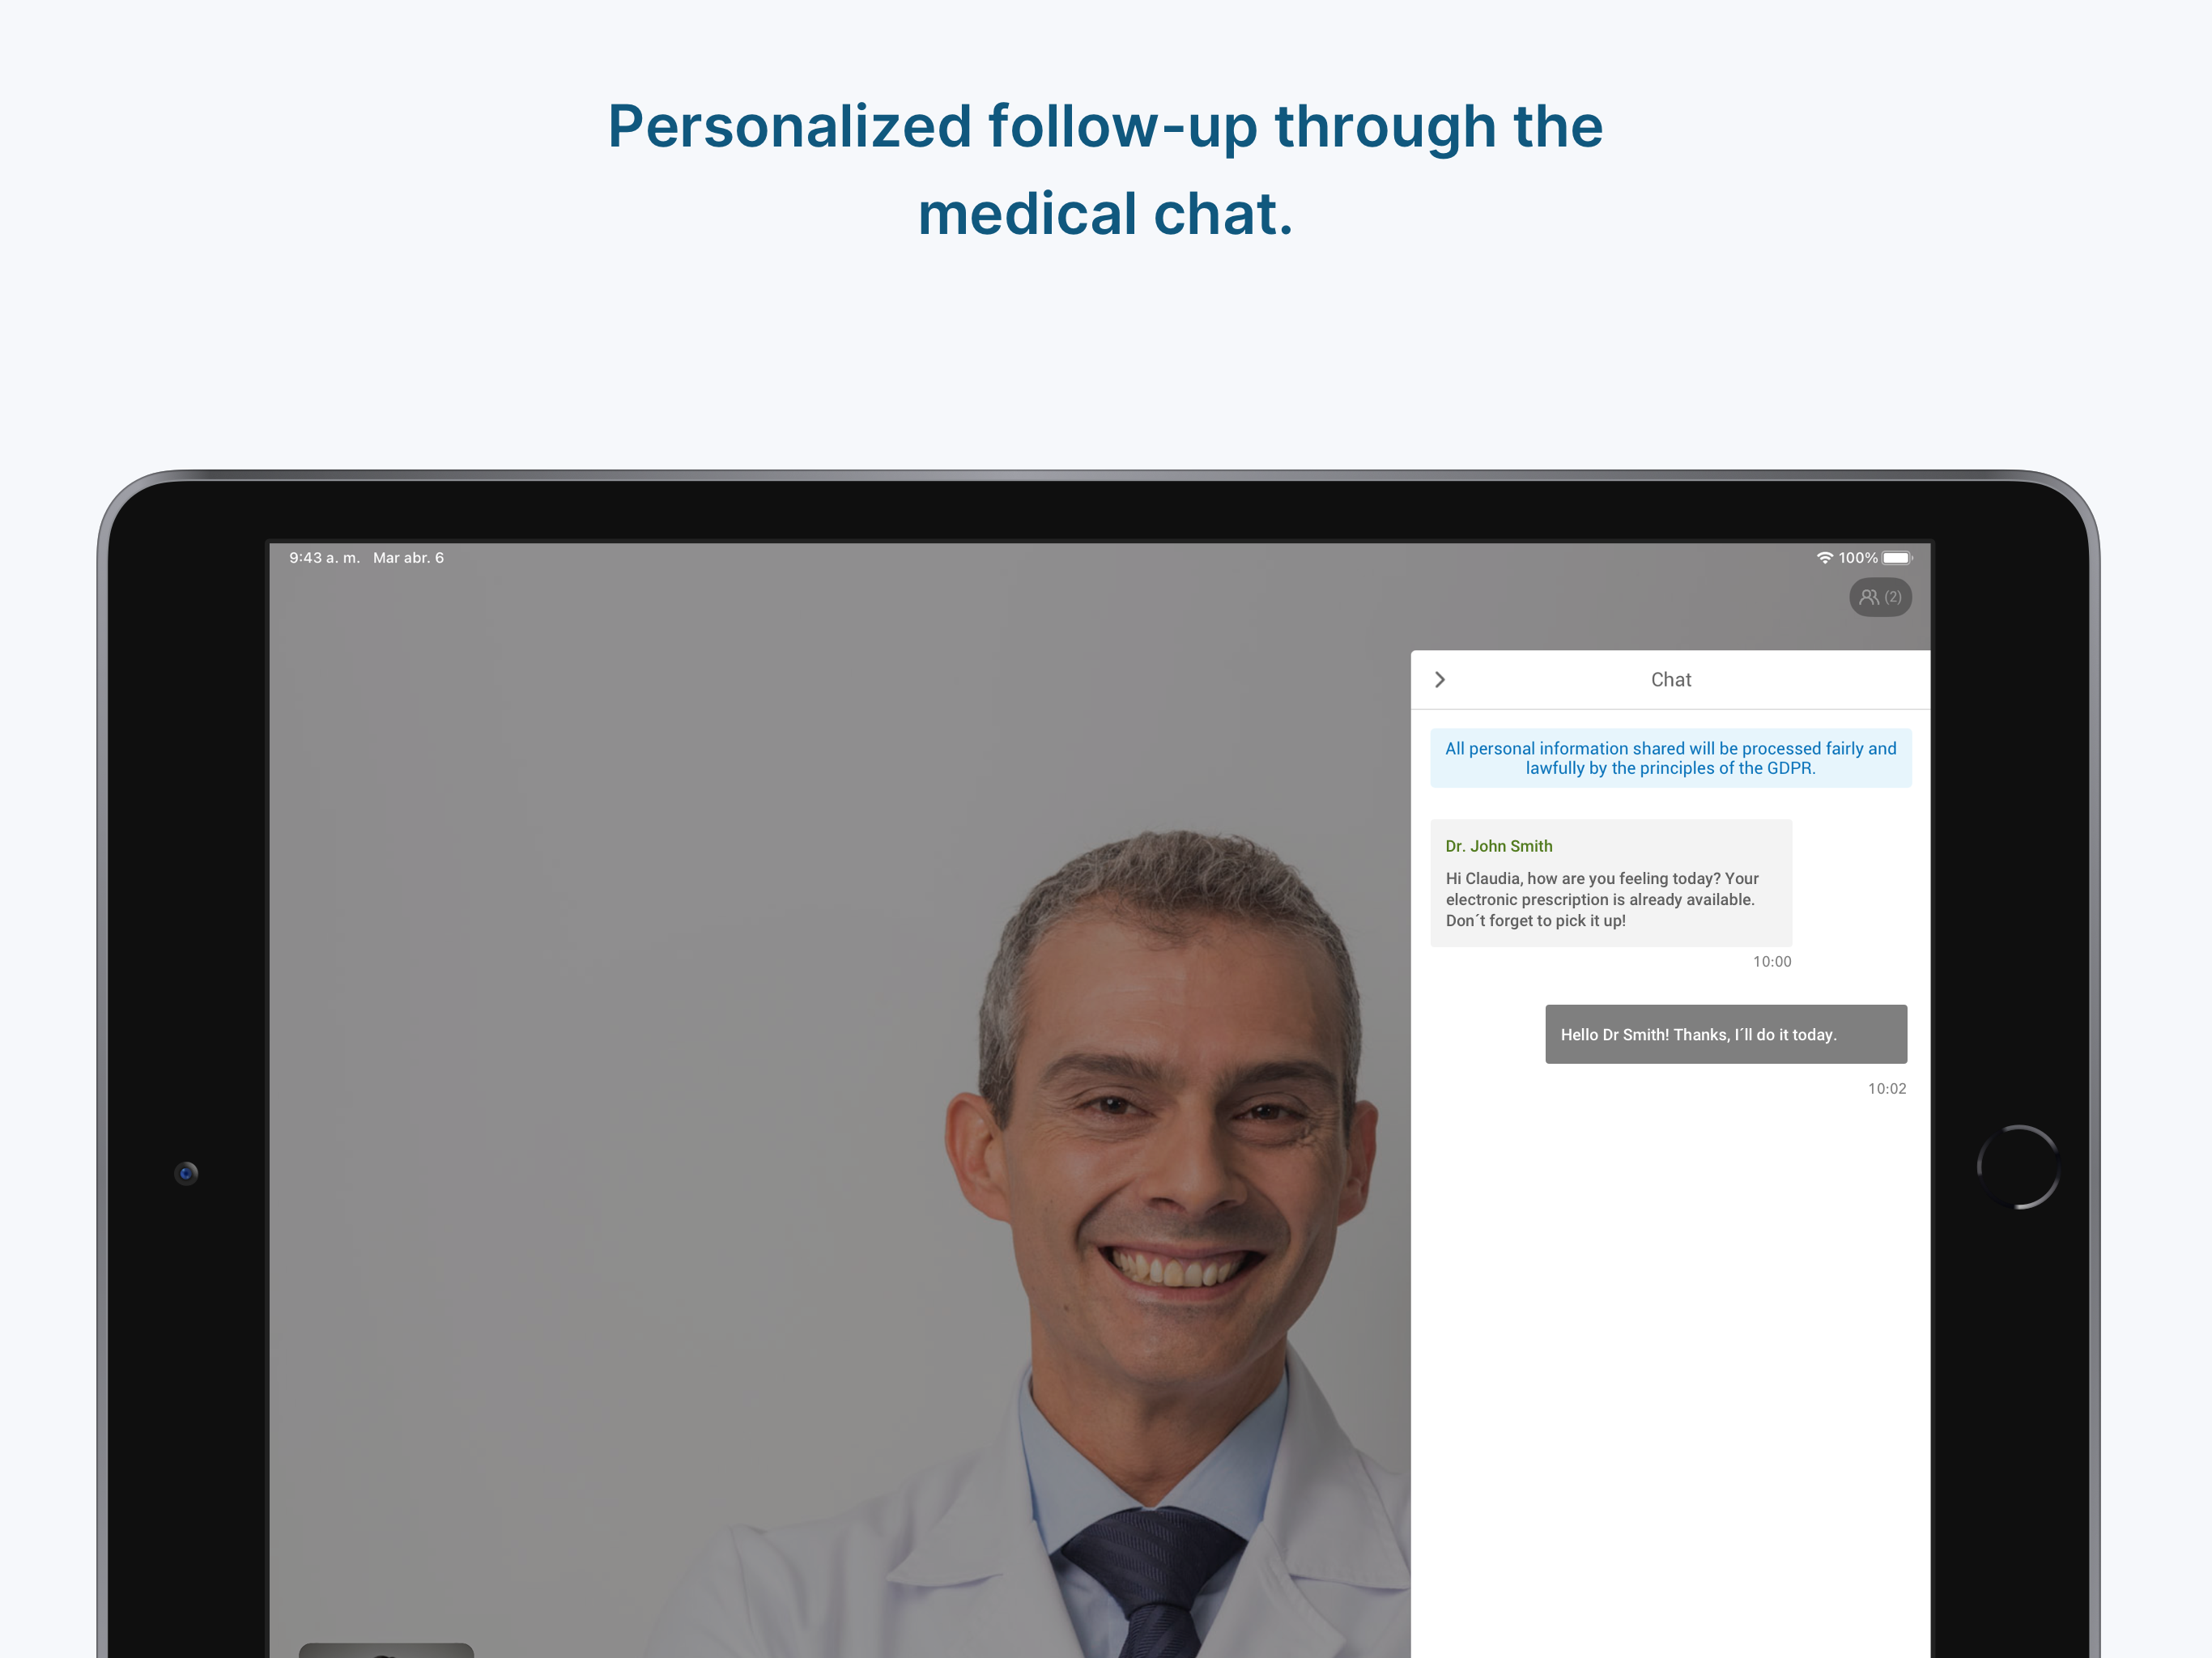 Personalised follow-ups through the medical chat.